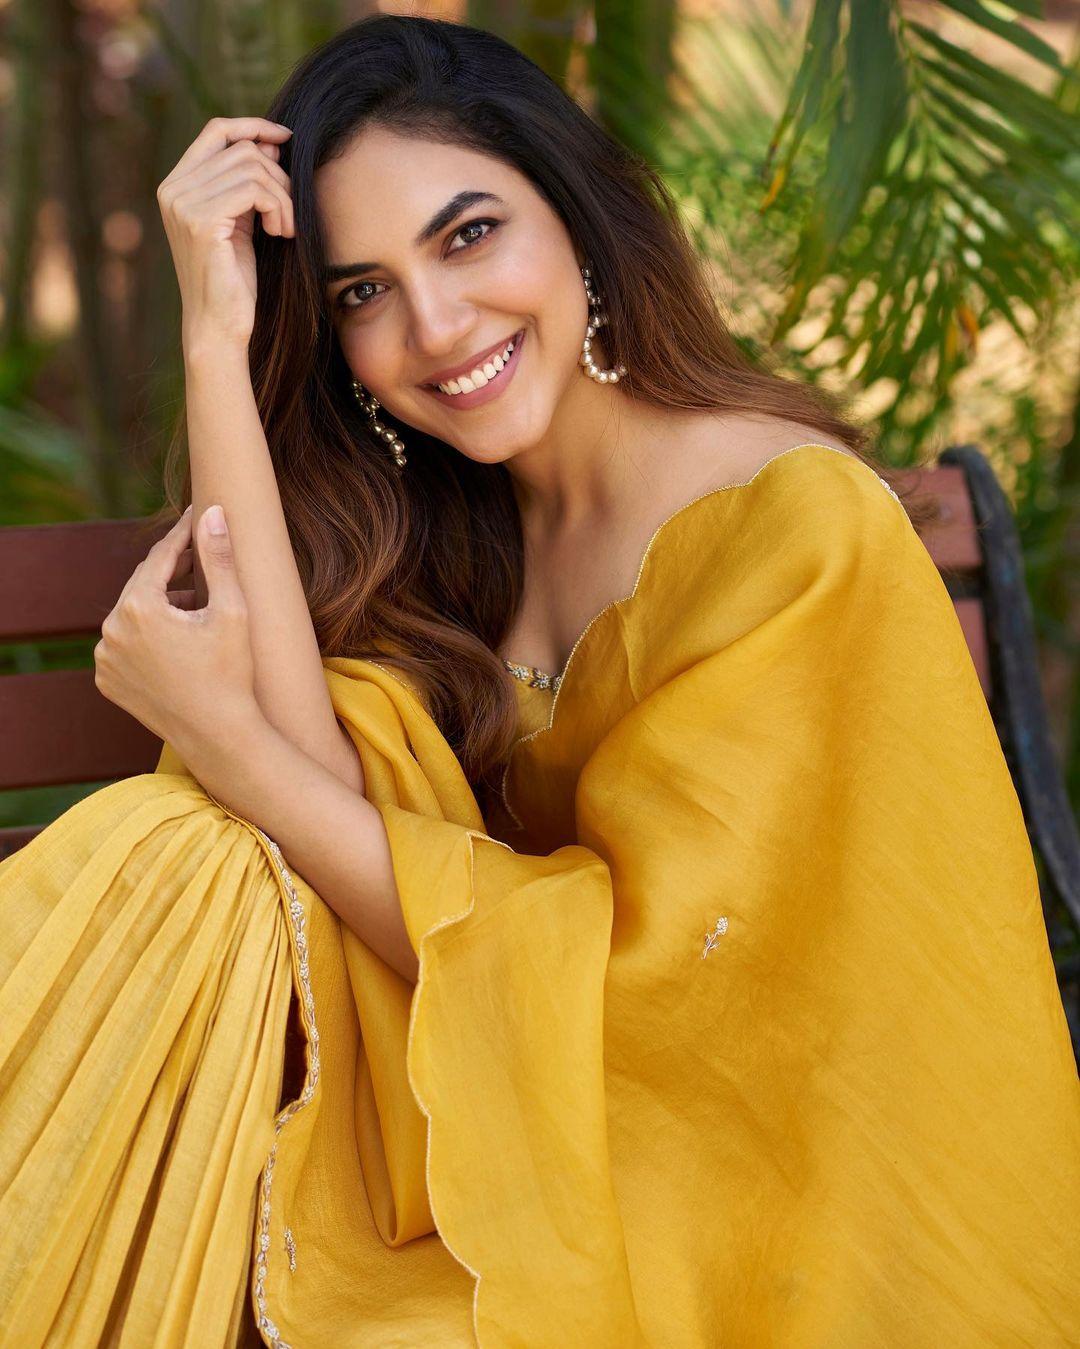 Actress Ritu Varma Fucking Videos - South indian actress hot photos |Ritu Varma looking very beautiful and sexy  stills in yellow dress Photos: HD Images, Pictures, Stills, First Look  Posters of South indian actress hot photos |Ritu Varma